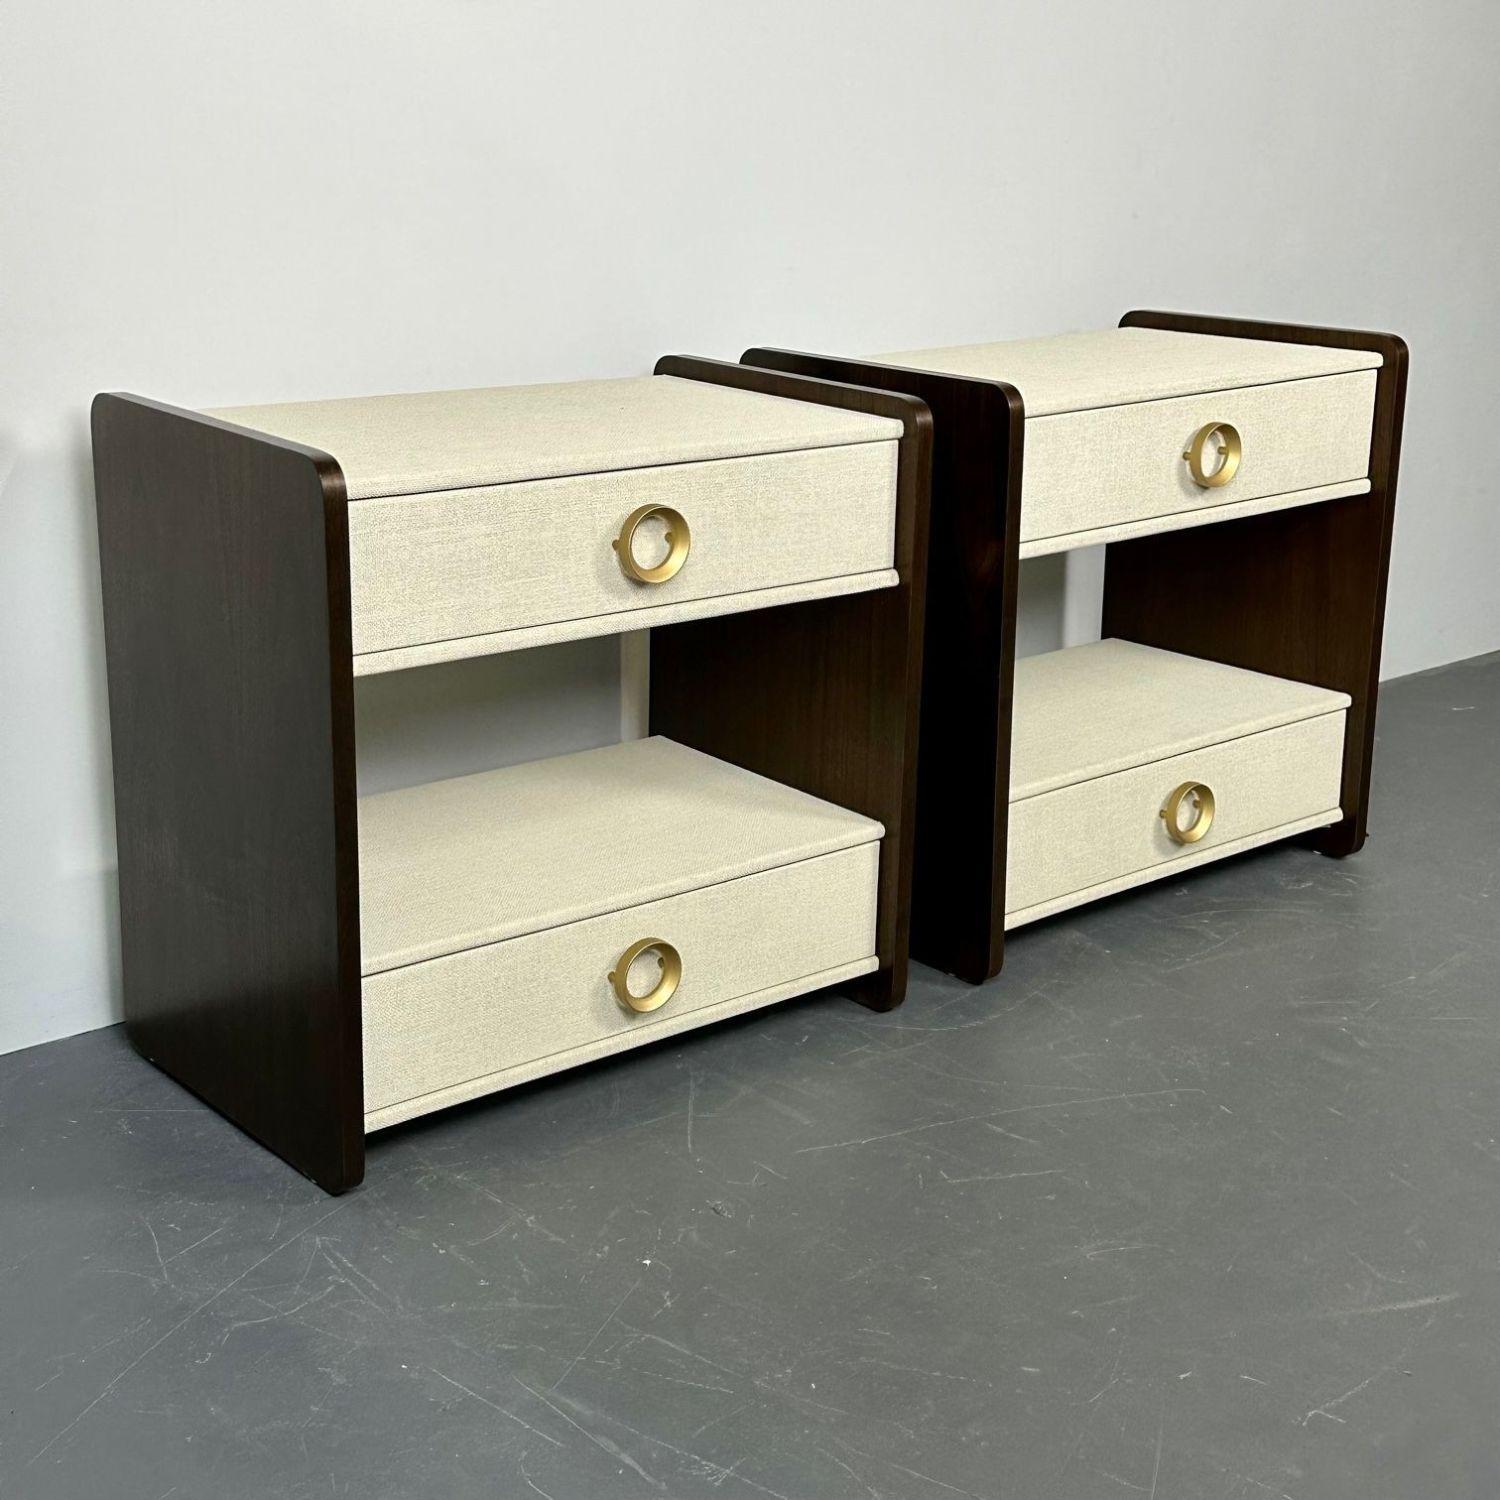 Pair Linen Wrapped Nightstands, End or Side Tables, Beige, Walnut, American
Custom quality pair of chests each wooden wrapped in Linen made in America. This finely decorative pair of bedside tables or end tables are wide and quite functional in form